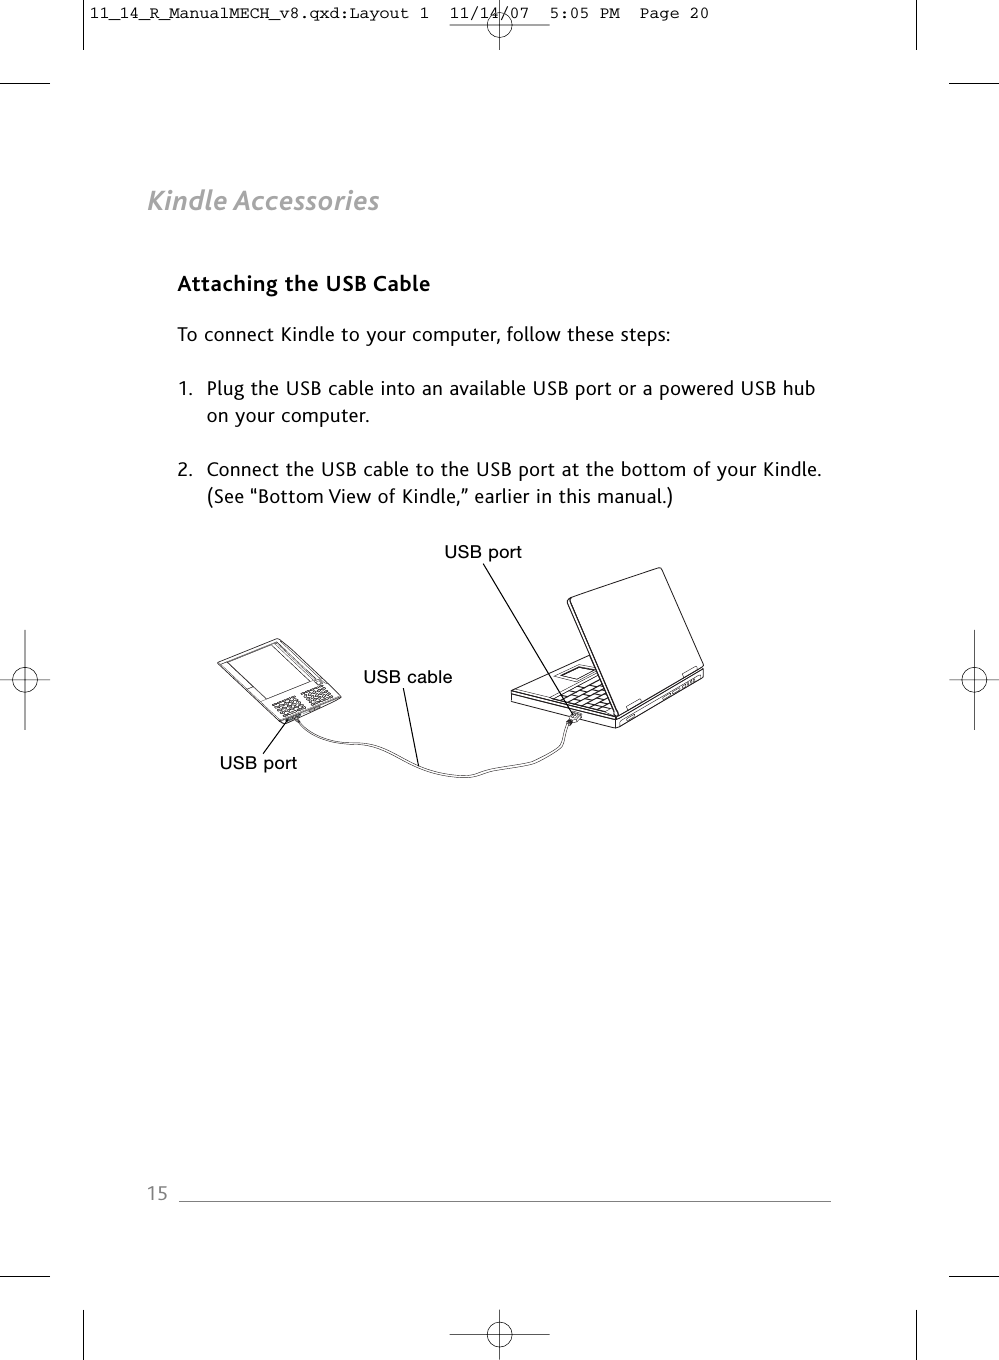 Kindle AccessoriesAttaching the USB CableTo connect Kindle to your computer, follow these steps:1. Plug the USB cable into an available USB port or a powered USB hub on your computer.2. Connect the USB cable to the USB port at the bottom of your Kindle. (See “Bottom View of Kindle,” earlier in this manual.)15USB portUSB cableUSB port11_14_R_ManualMECH_v8.qxd:Layout 1  11/14/07  5:05 PM  Page 20